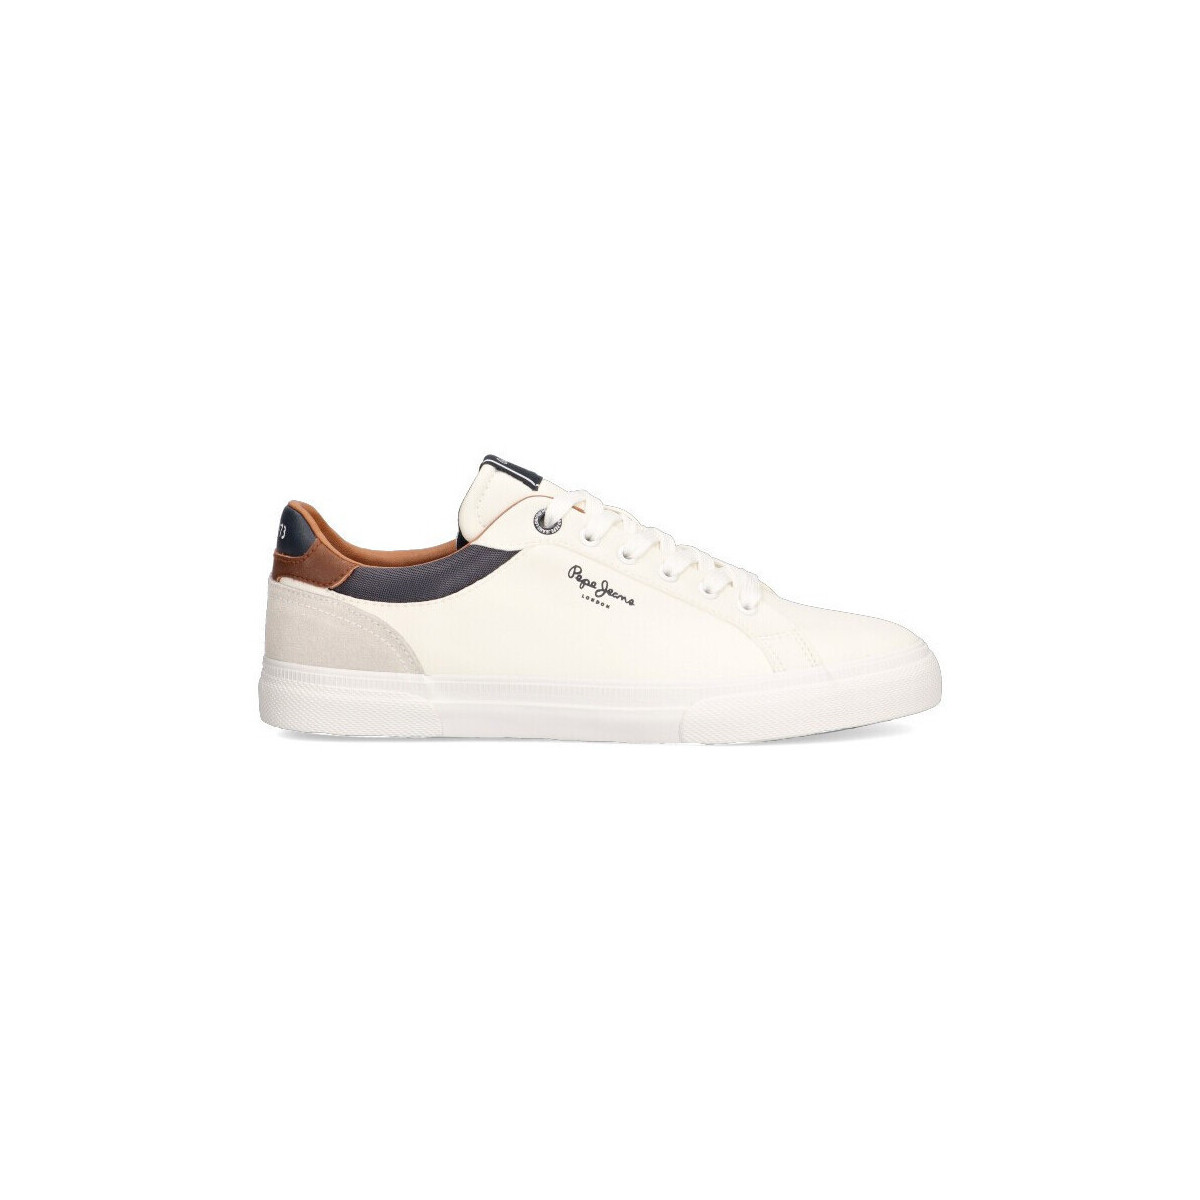 Pepe jeans  Sneakers Pepe jeans 74312